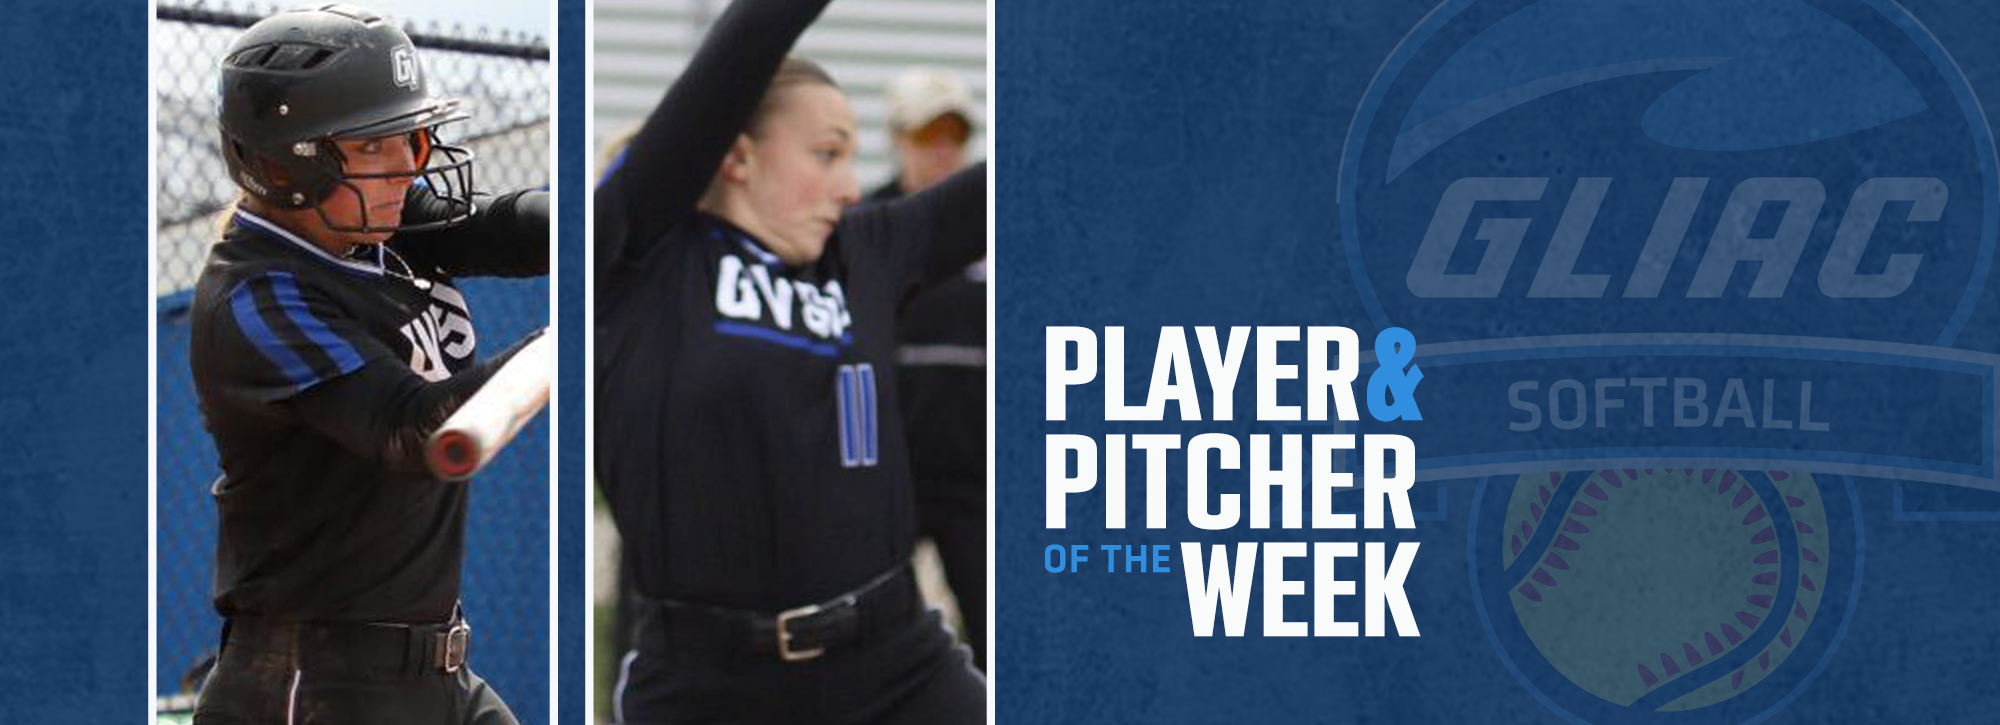 GVSU's Goble and Beatus selected for GLIAC weekly softball honors